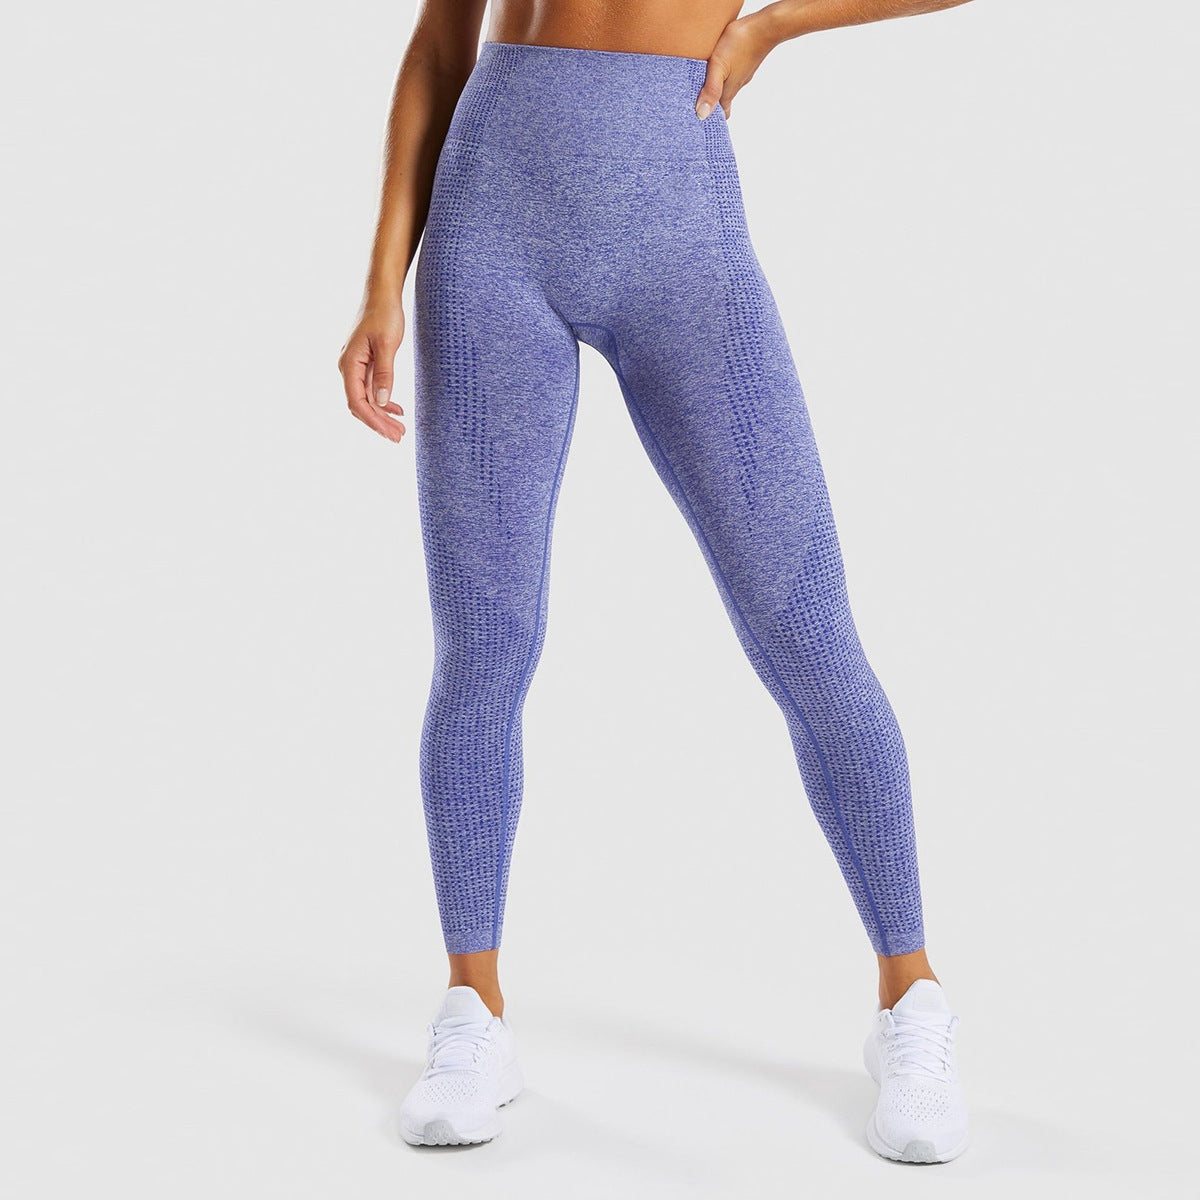 quick-drying-pants-sports-tights-fitness-pants